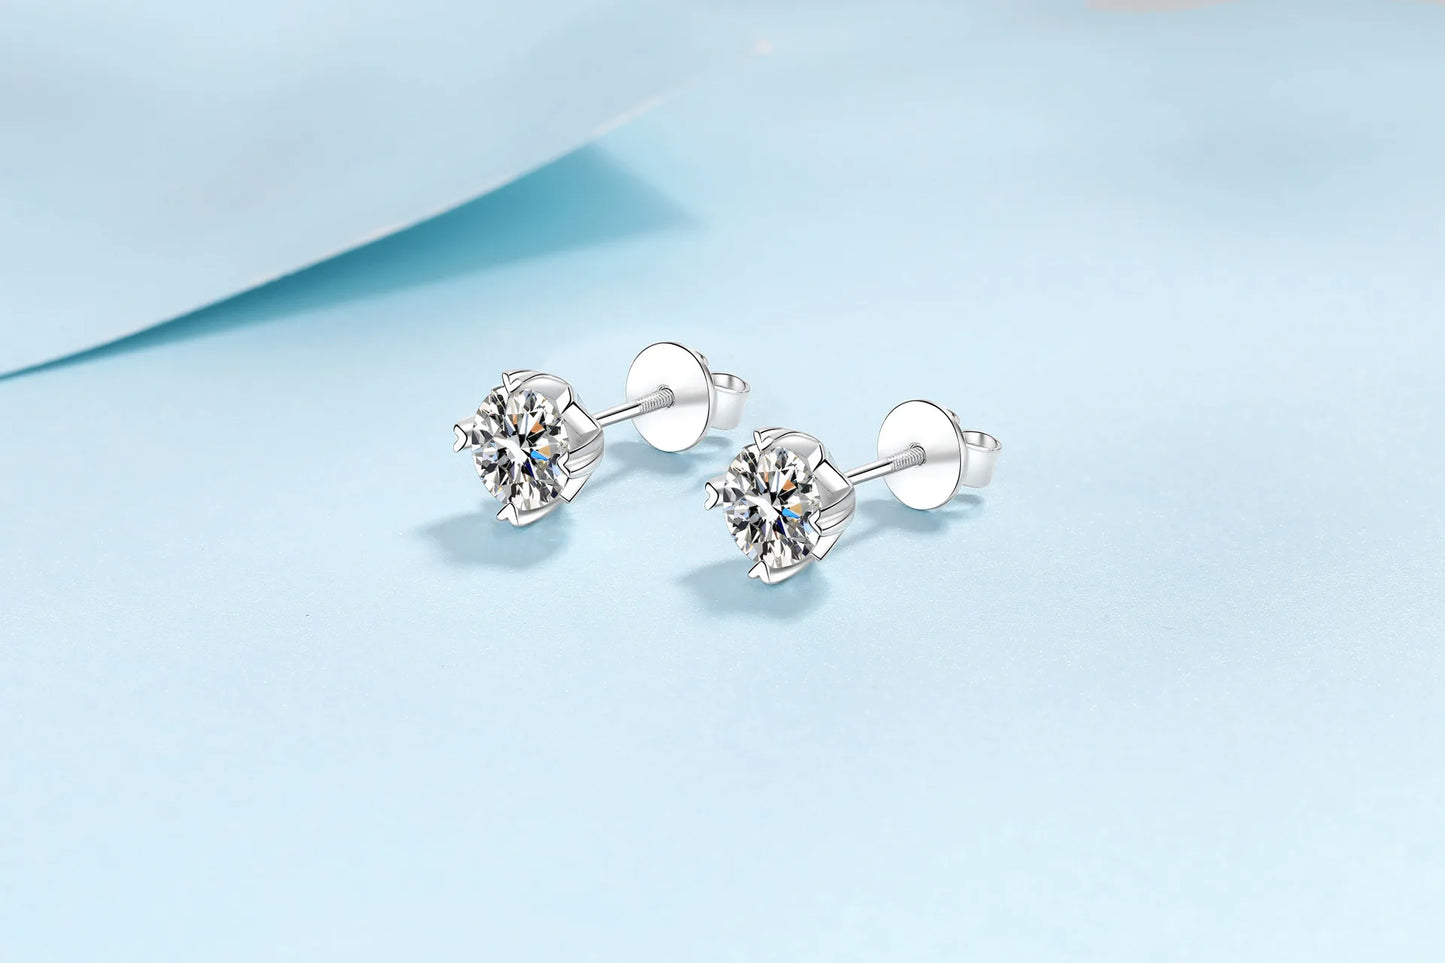 0.3/0.5ct/1ct/2ct Round Cut Moissanite Screw-Back Earrings in 18K White Gold Plated 925 Sterling Silver